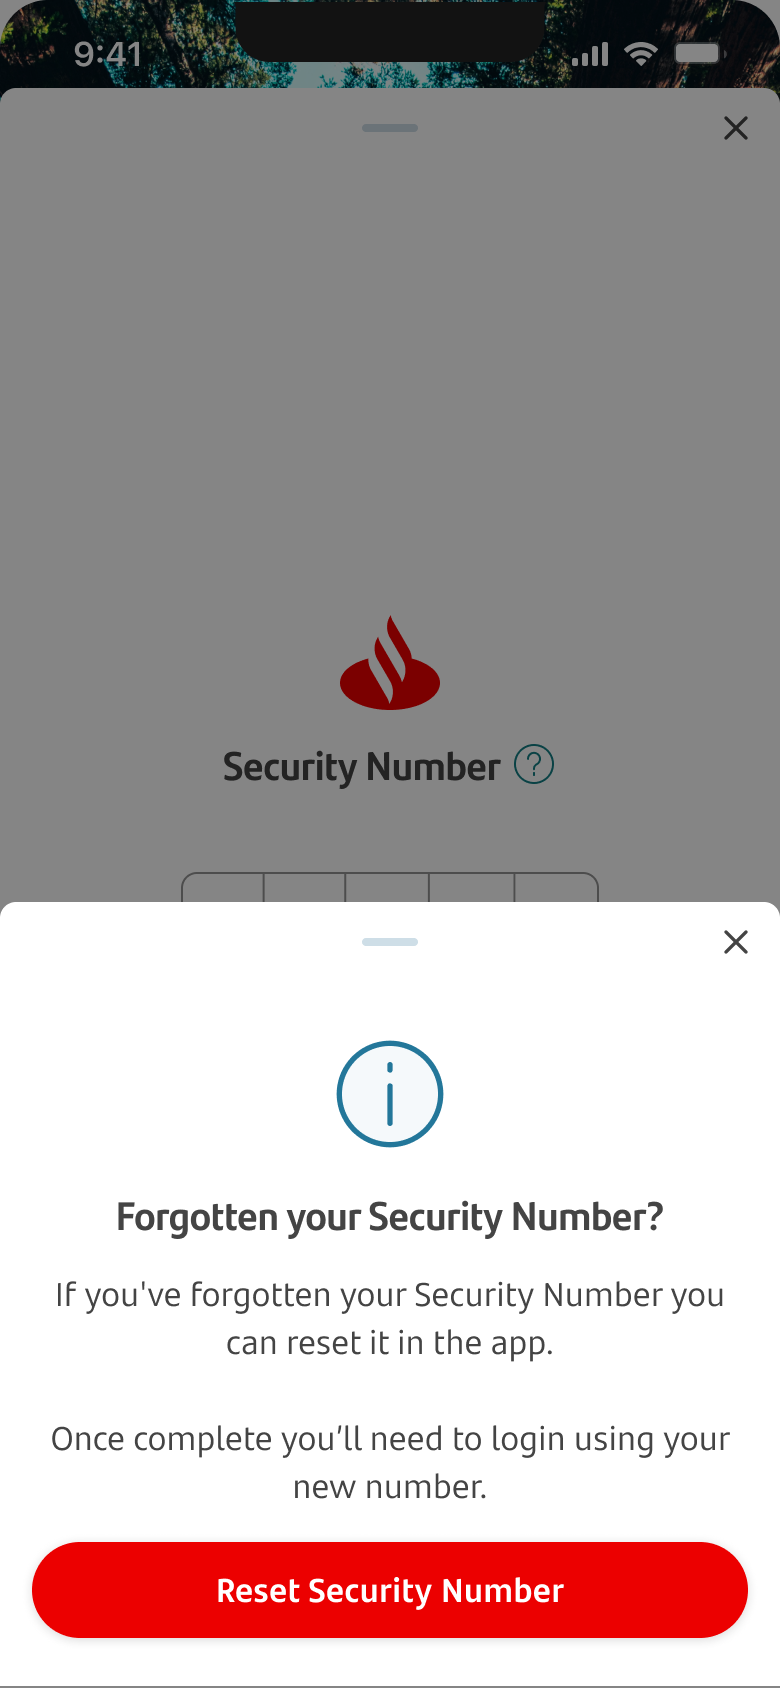 Alert screen asking customers if they had forgotten their Security Number.